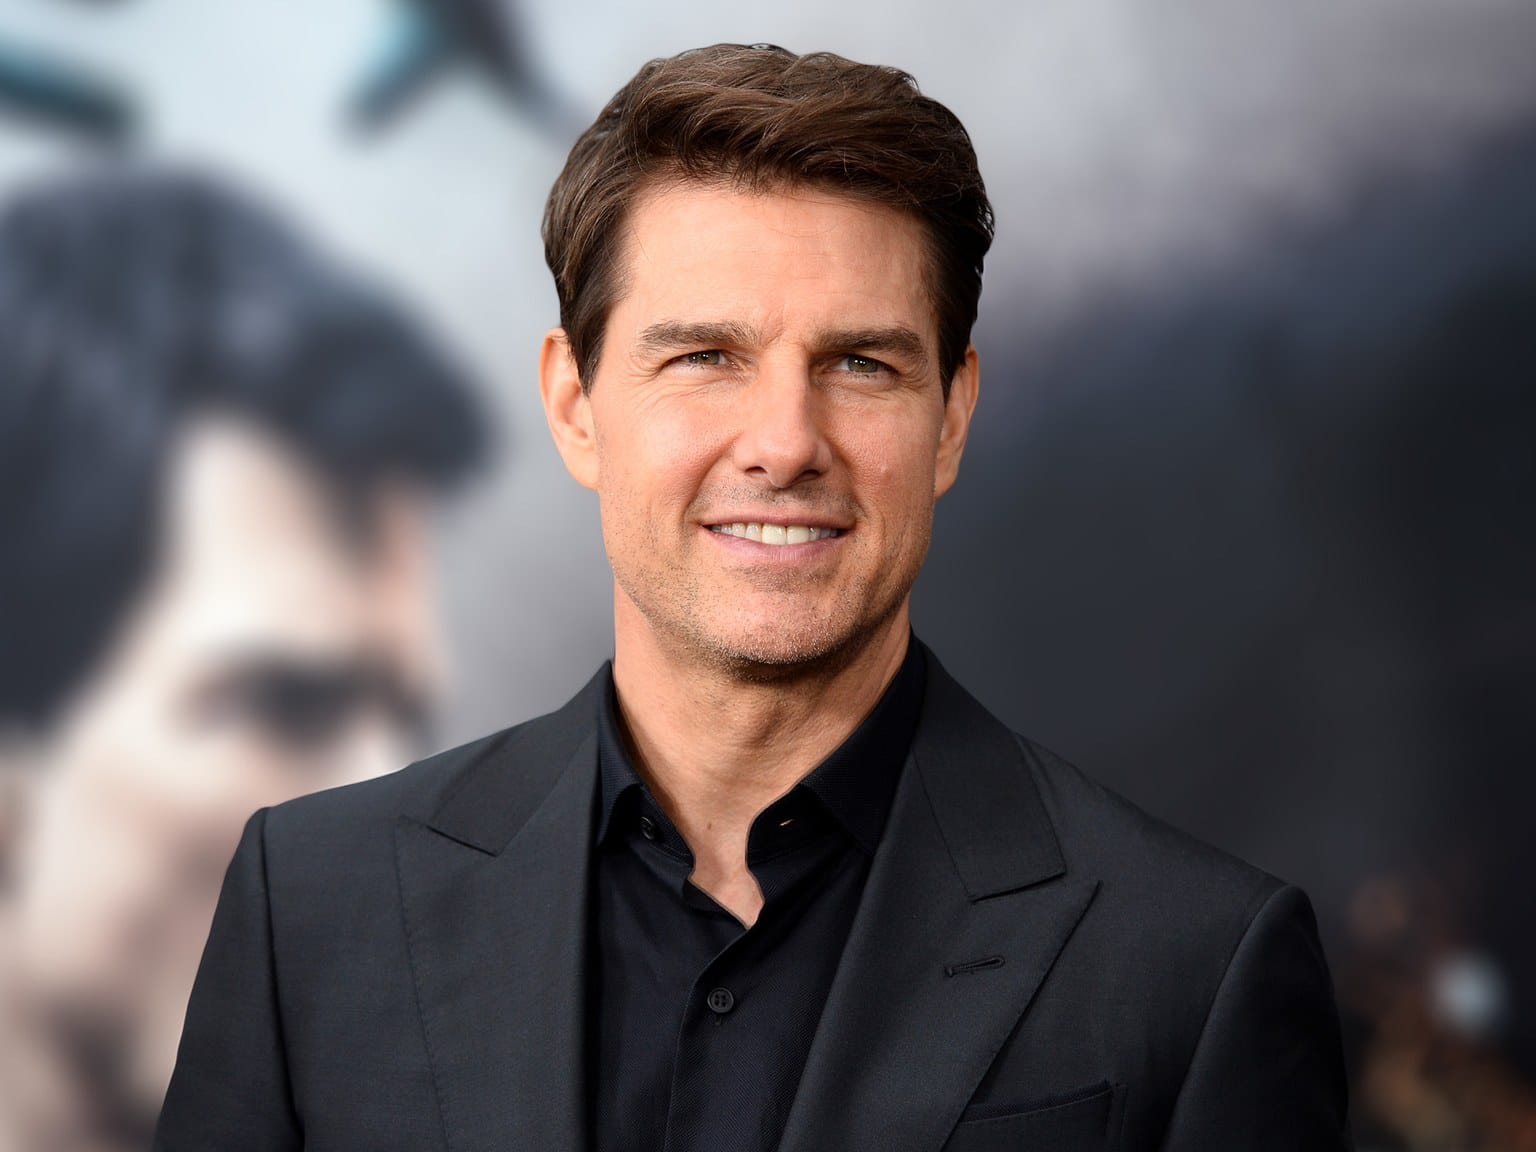 Tom Cruise Would've Starred in "The Shawshank Redemption" But the Director "Refused" the $3-Million Offer